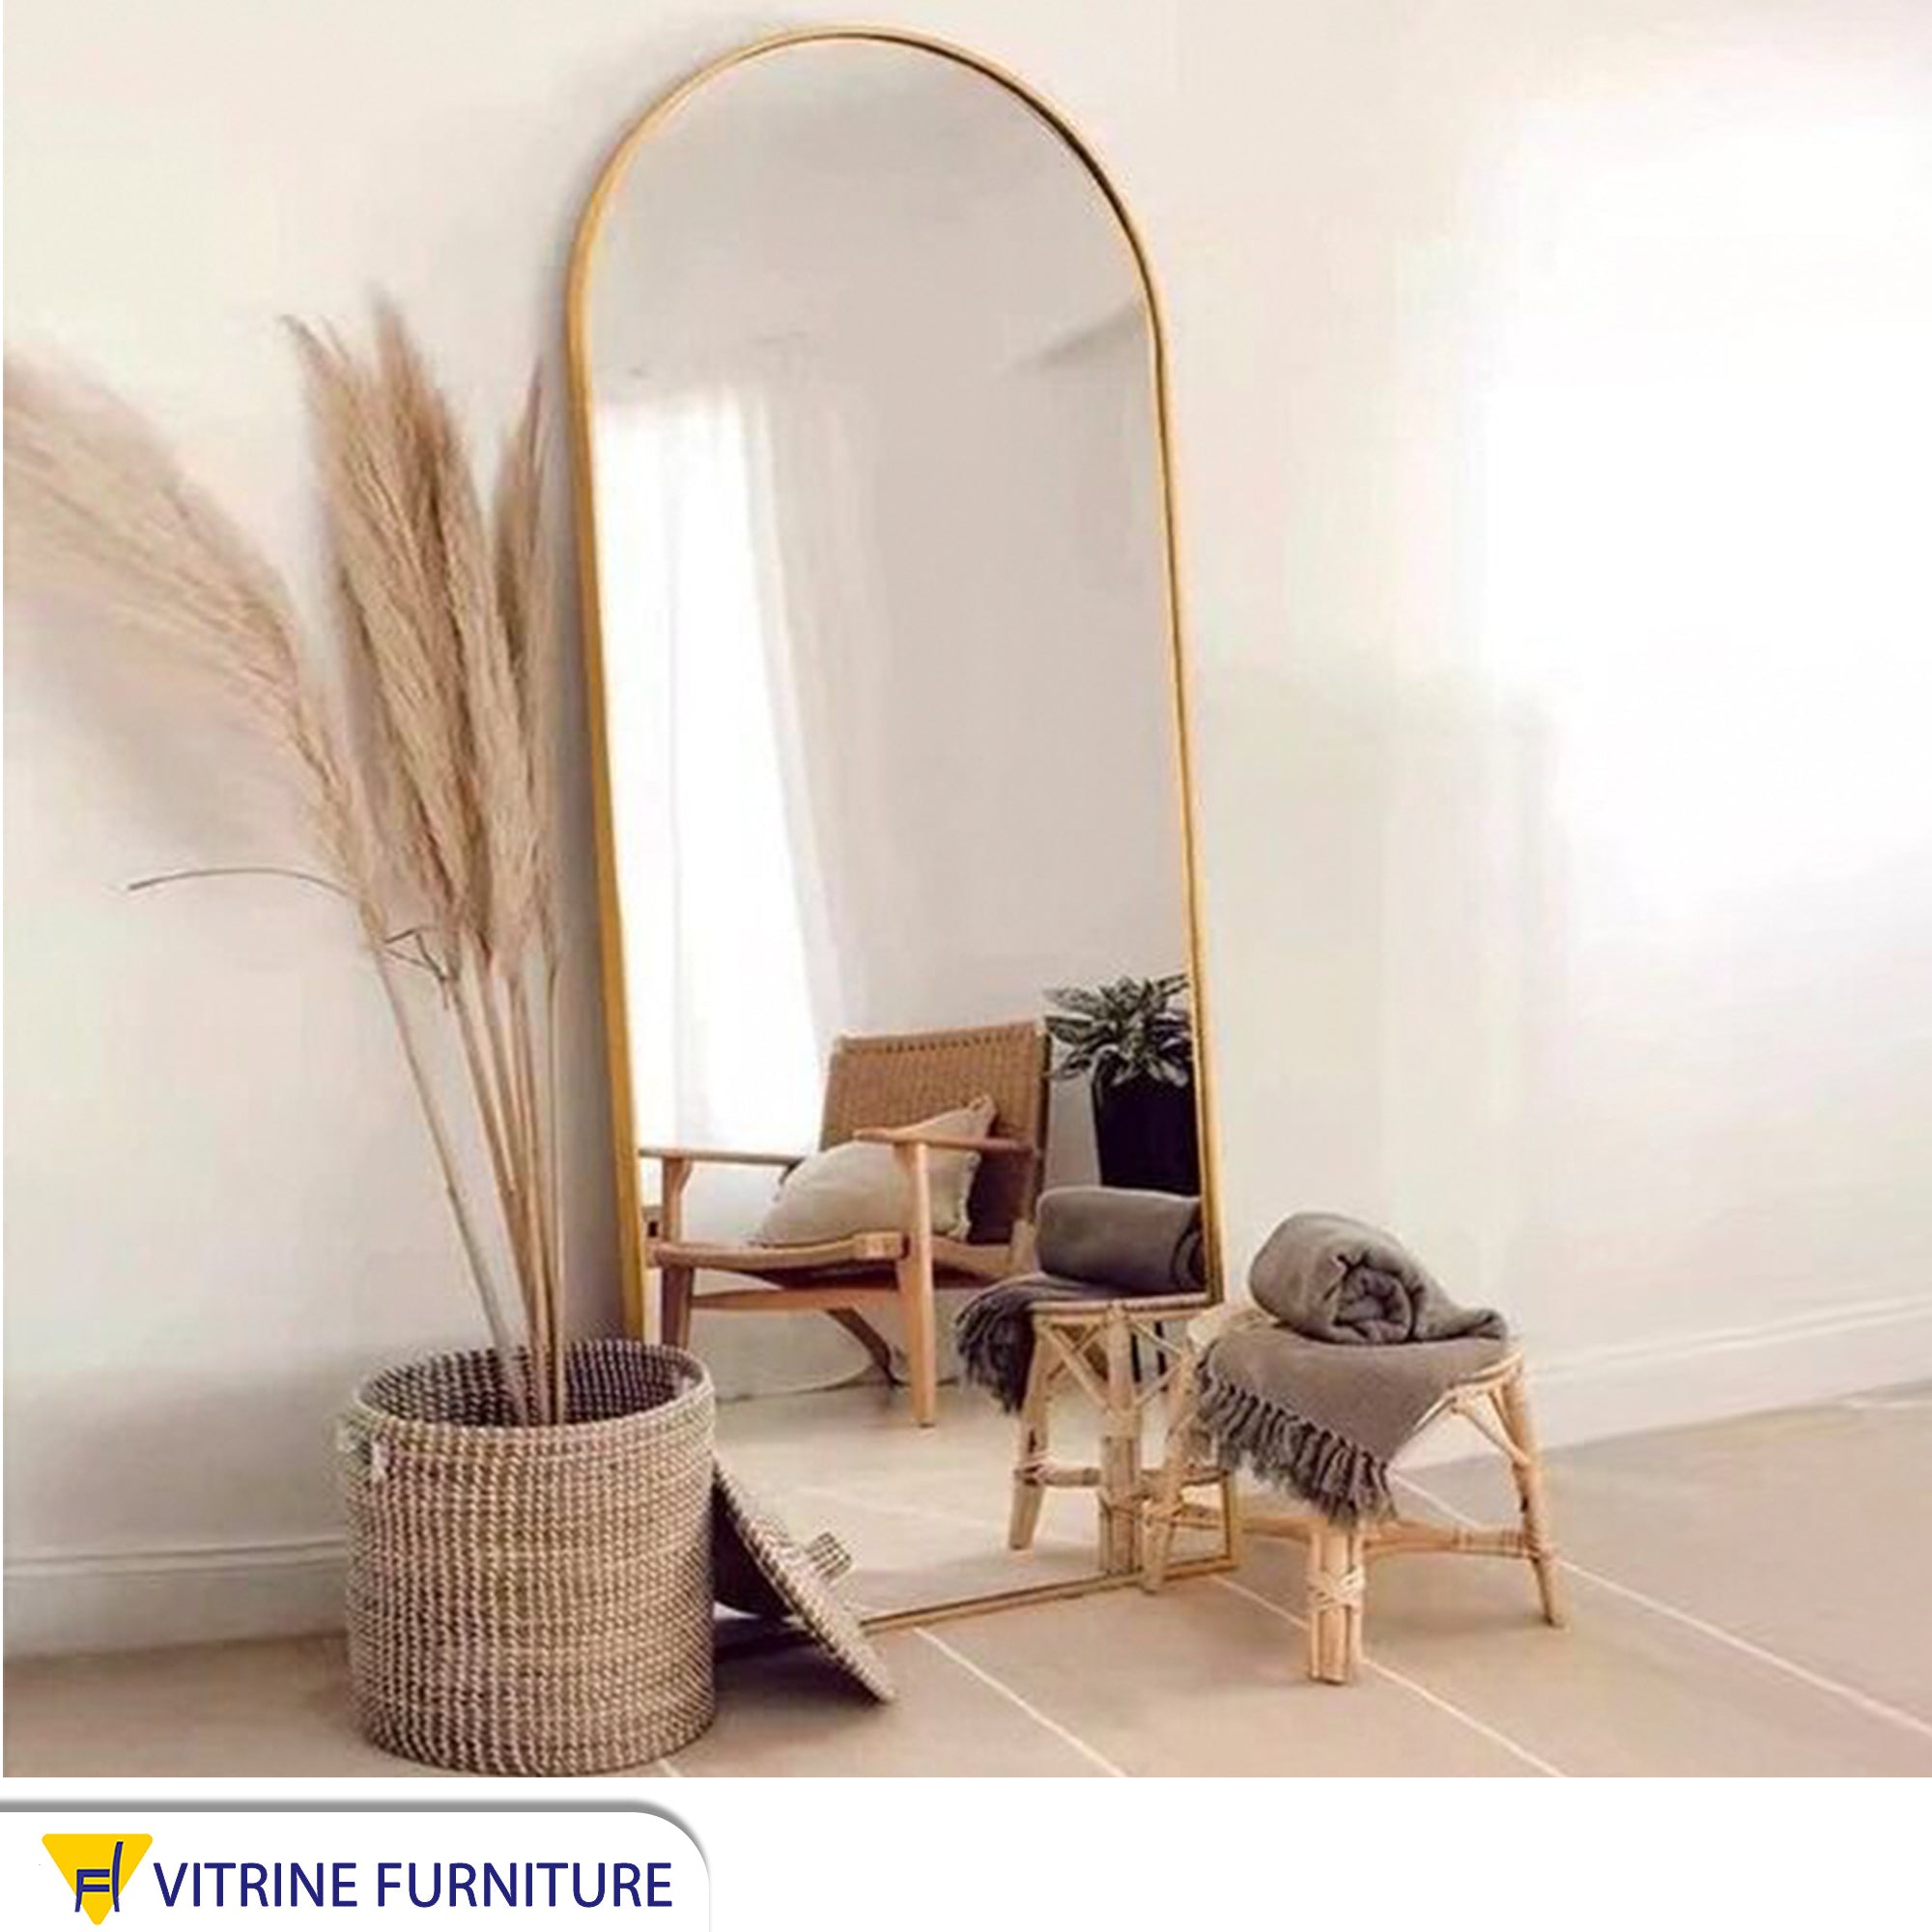 Stand mirror 50*150 with golden frame